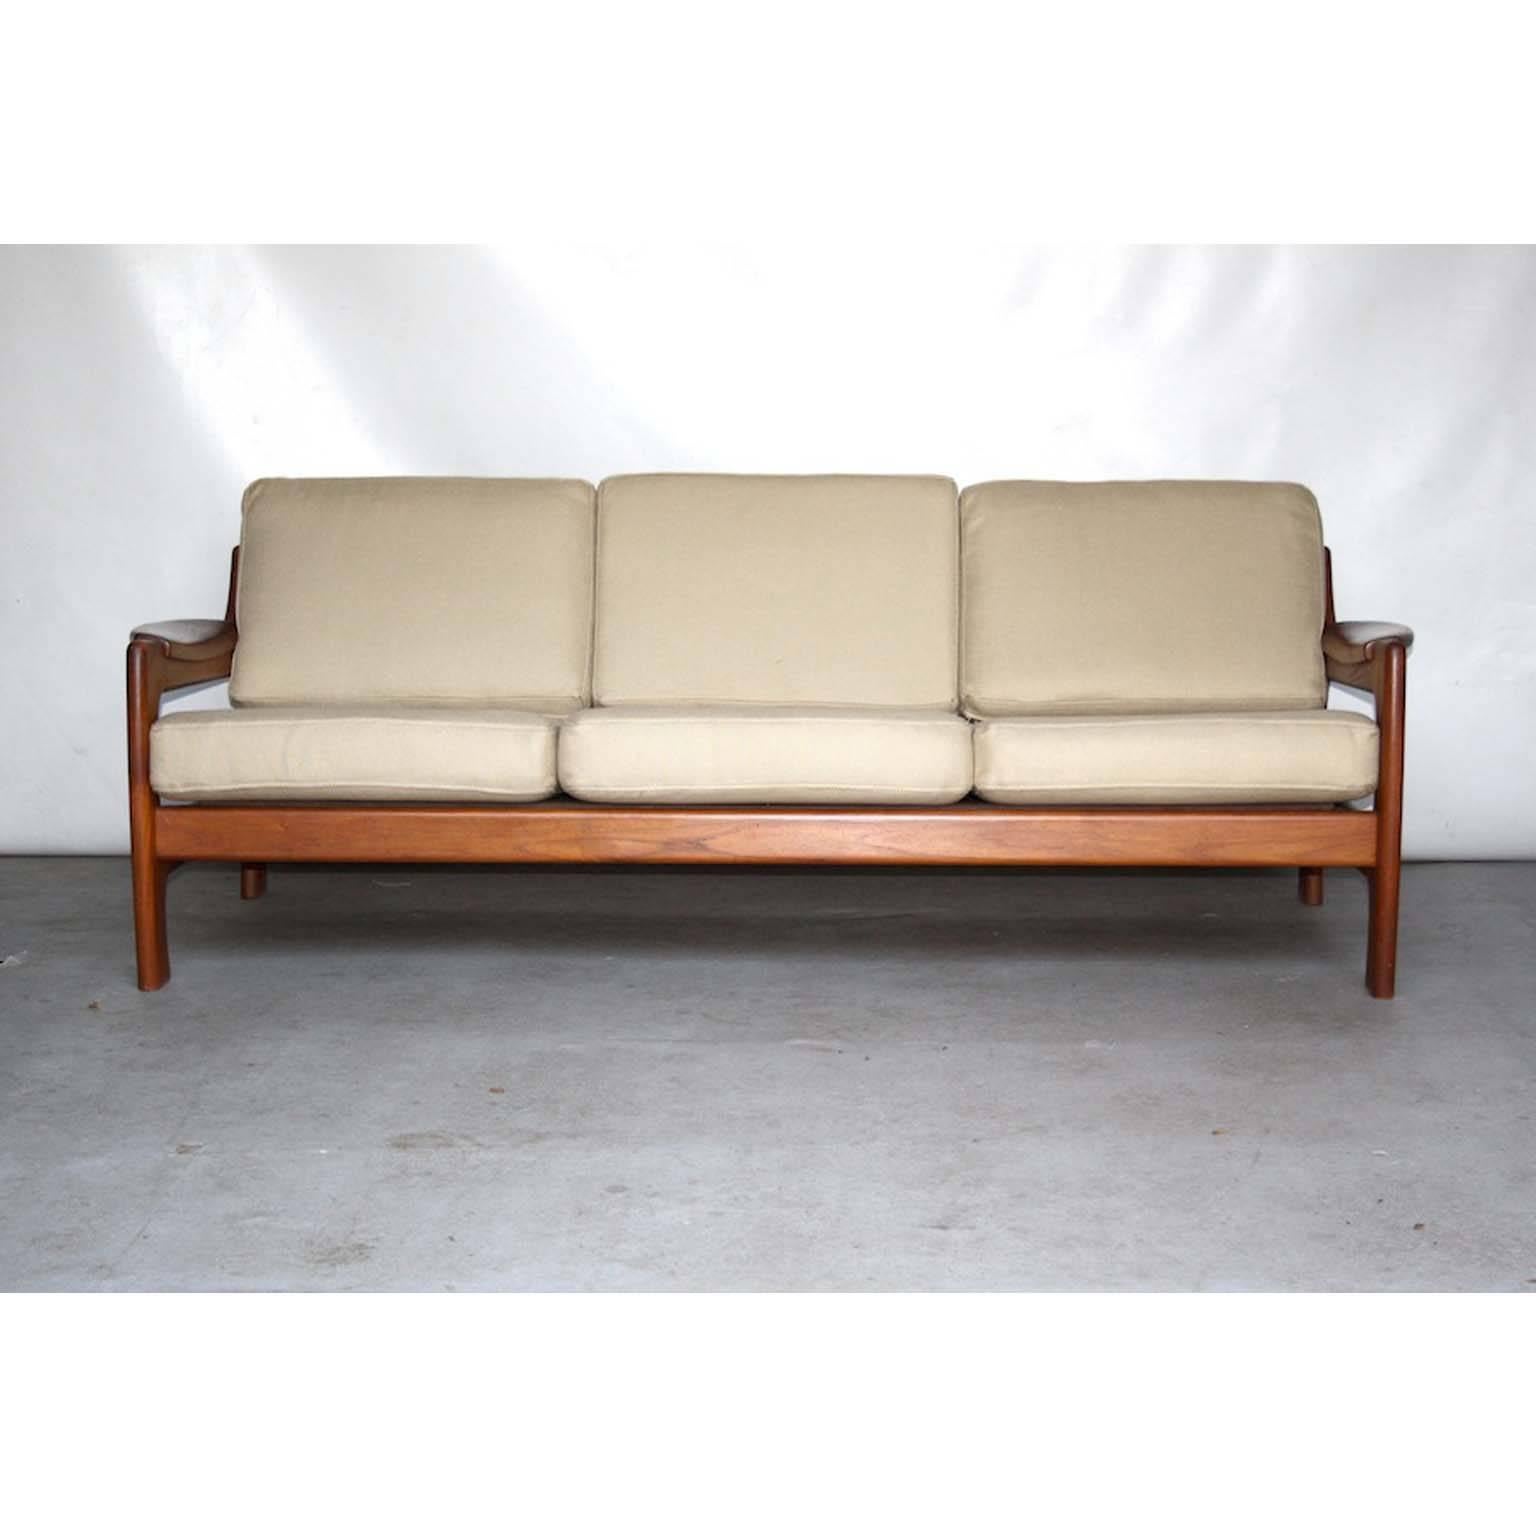 Teak sofa attributed to Arne Wahl Iversen for Komfort, Denmark, 1960s.

Beautiful Danish teak sofa. The sofa is very similar to the Komfort sofa and chair from Arne Wahl Iversen, so we think it is his design. The sofa is has a very beautiful